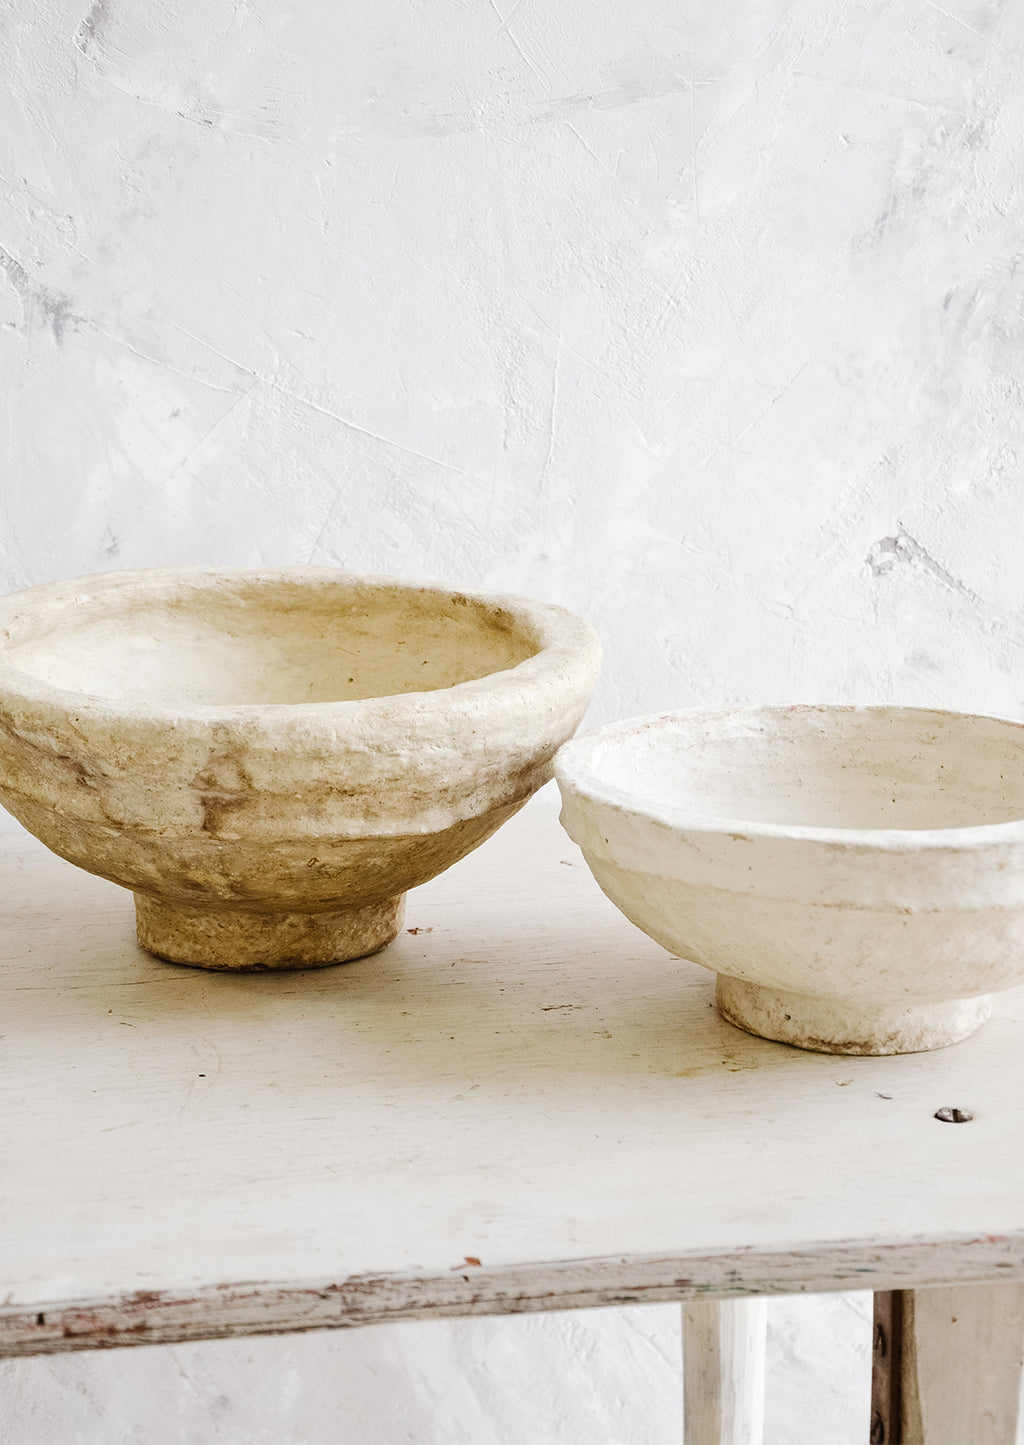 Medium: Small and medium paper mache bowls in ivory and tan